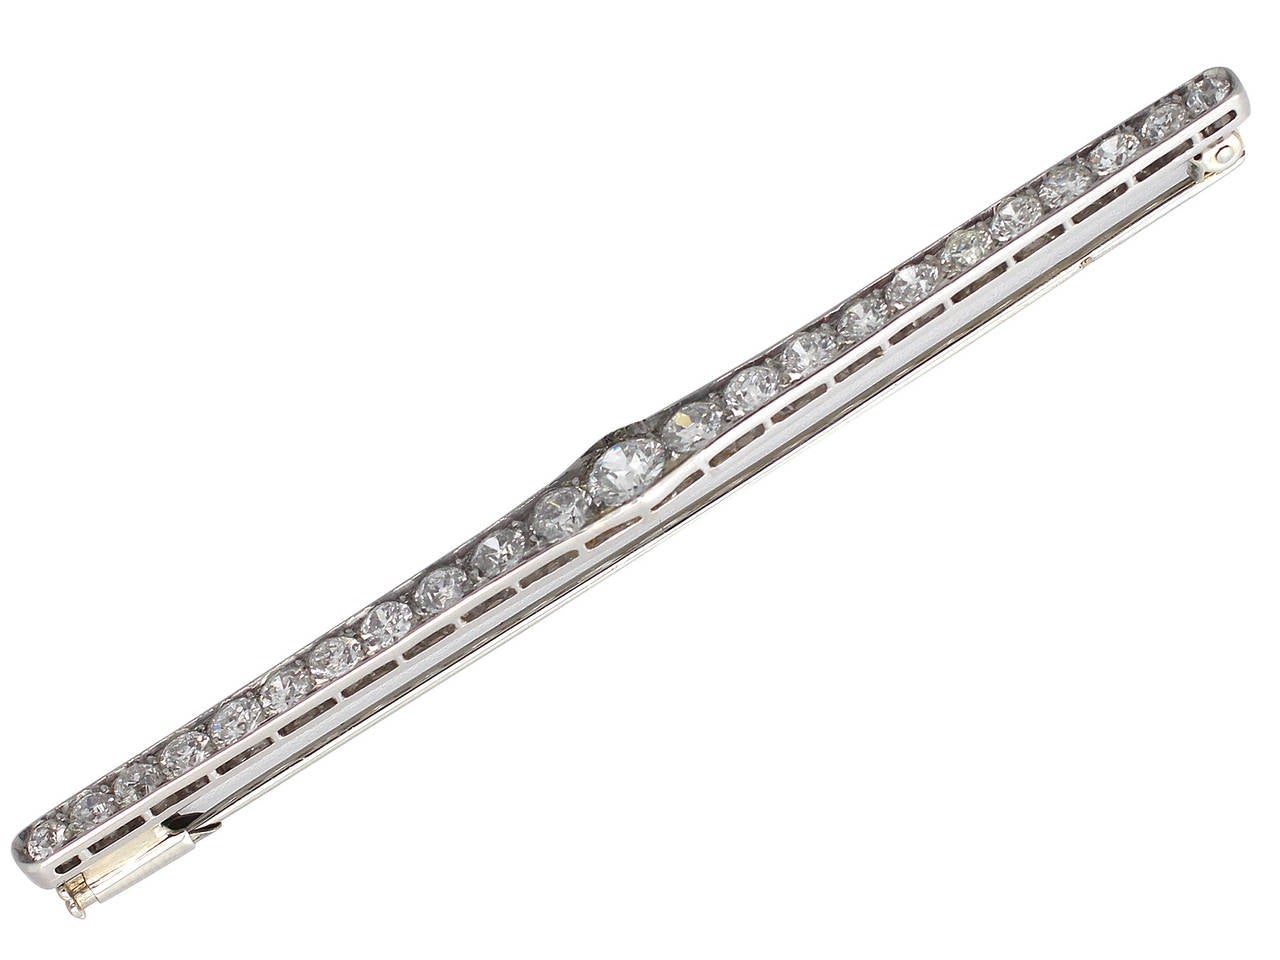 A stunning, fine and impressive antique 2.92 carat diamond and platinum bar brooch; part of our antique jewelry and estate jewelry collections

This stunning French antique 1920's diamond brooch has been crafted in platinum.

This large and